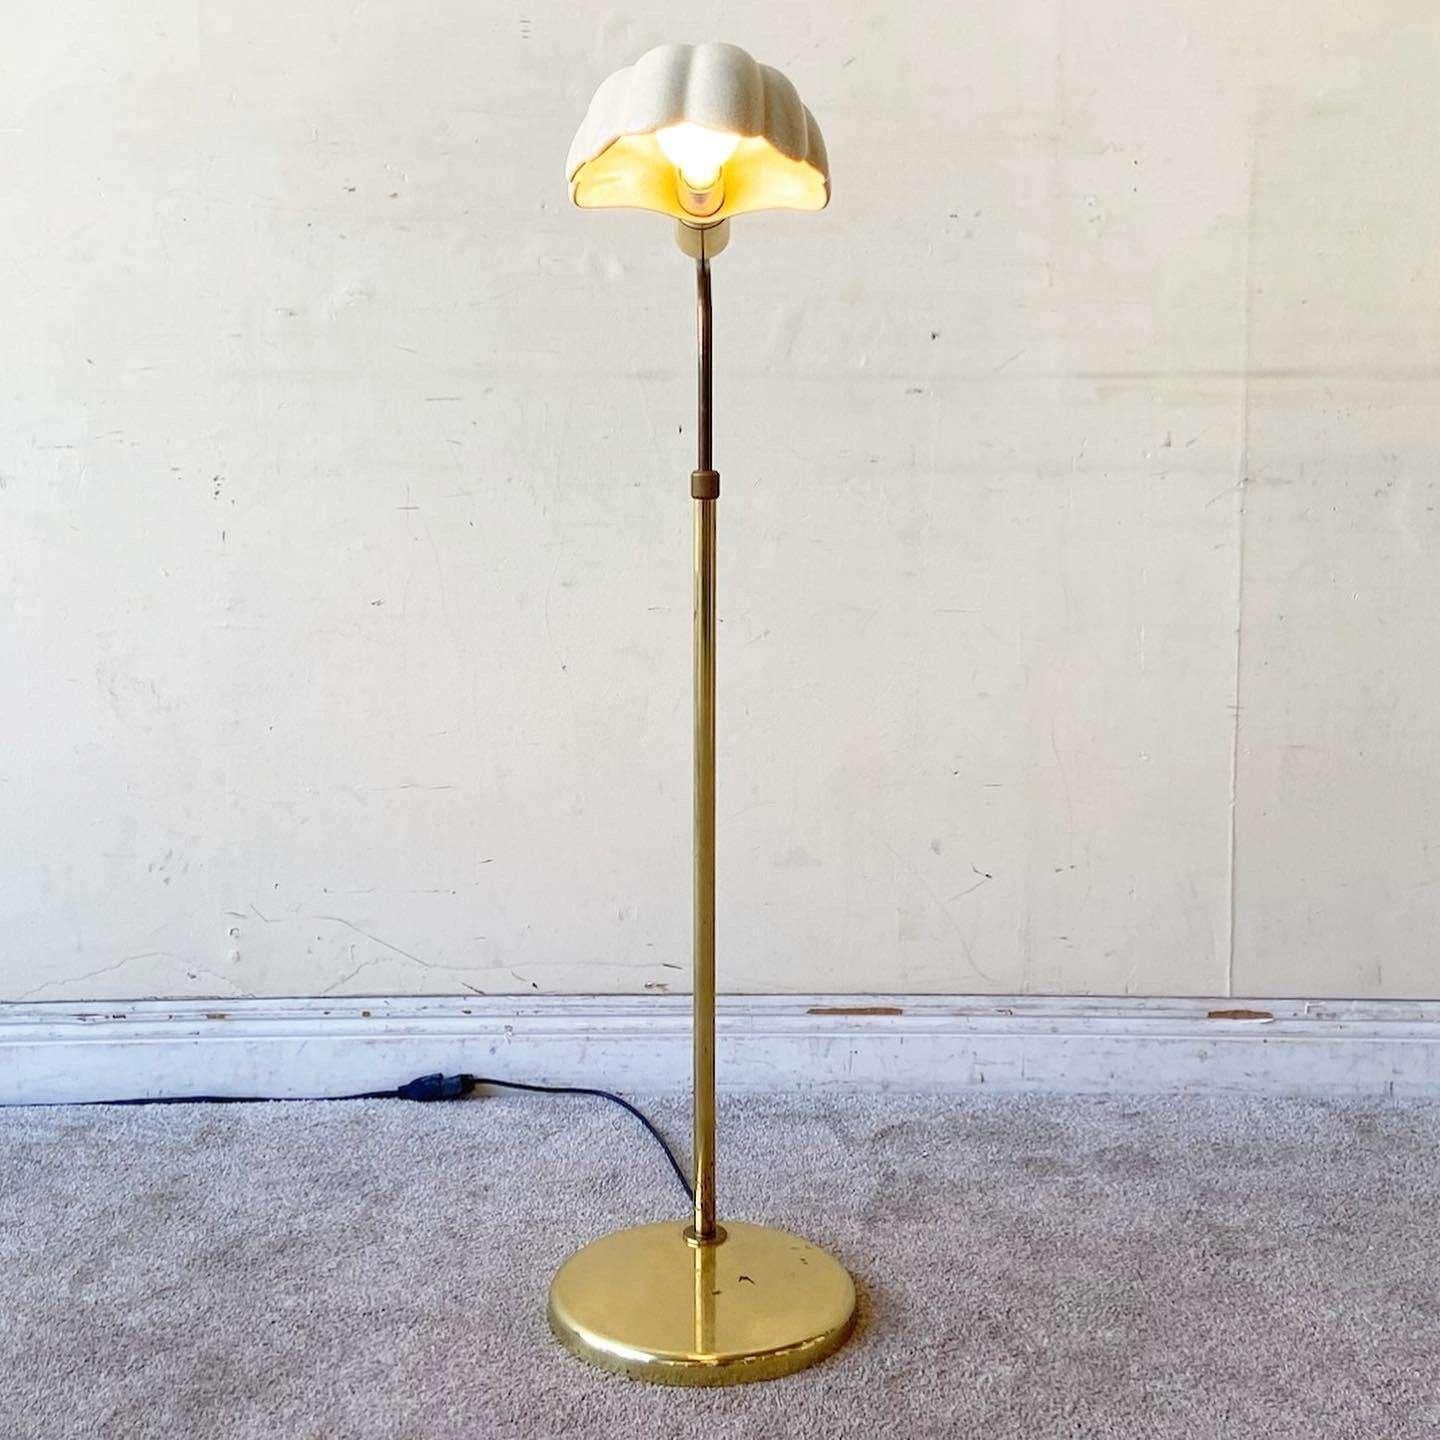 Amazing vintage Hollywood regency adjustable floor lamp. Features a ceramic clam shell lamp shade.

Extends in height from 41” to 63”